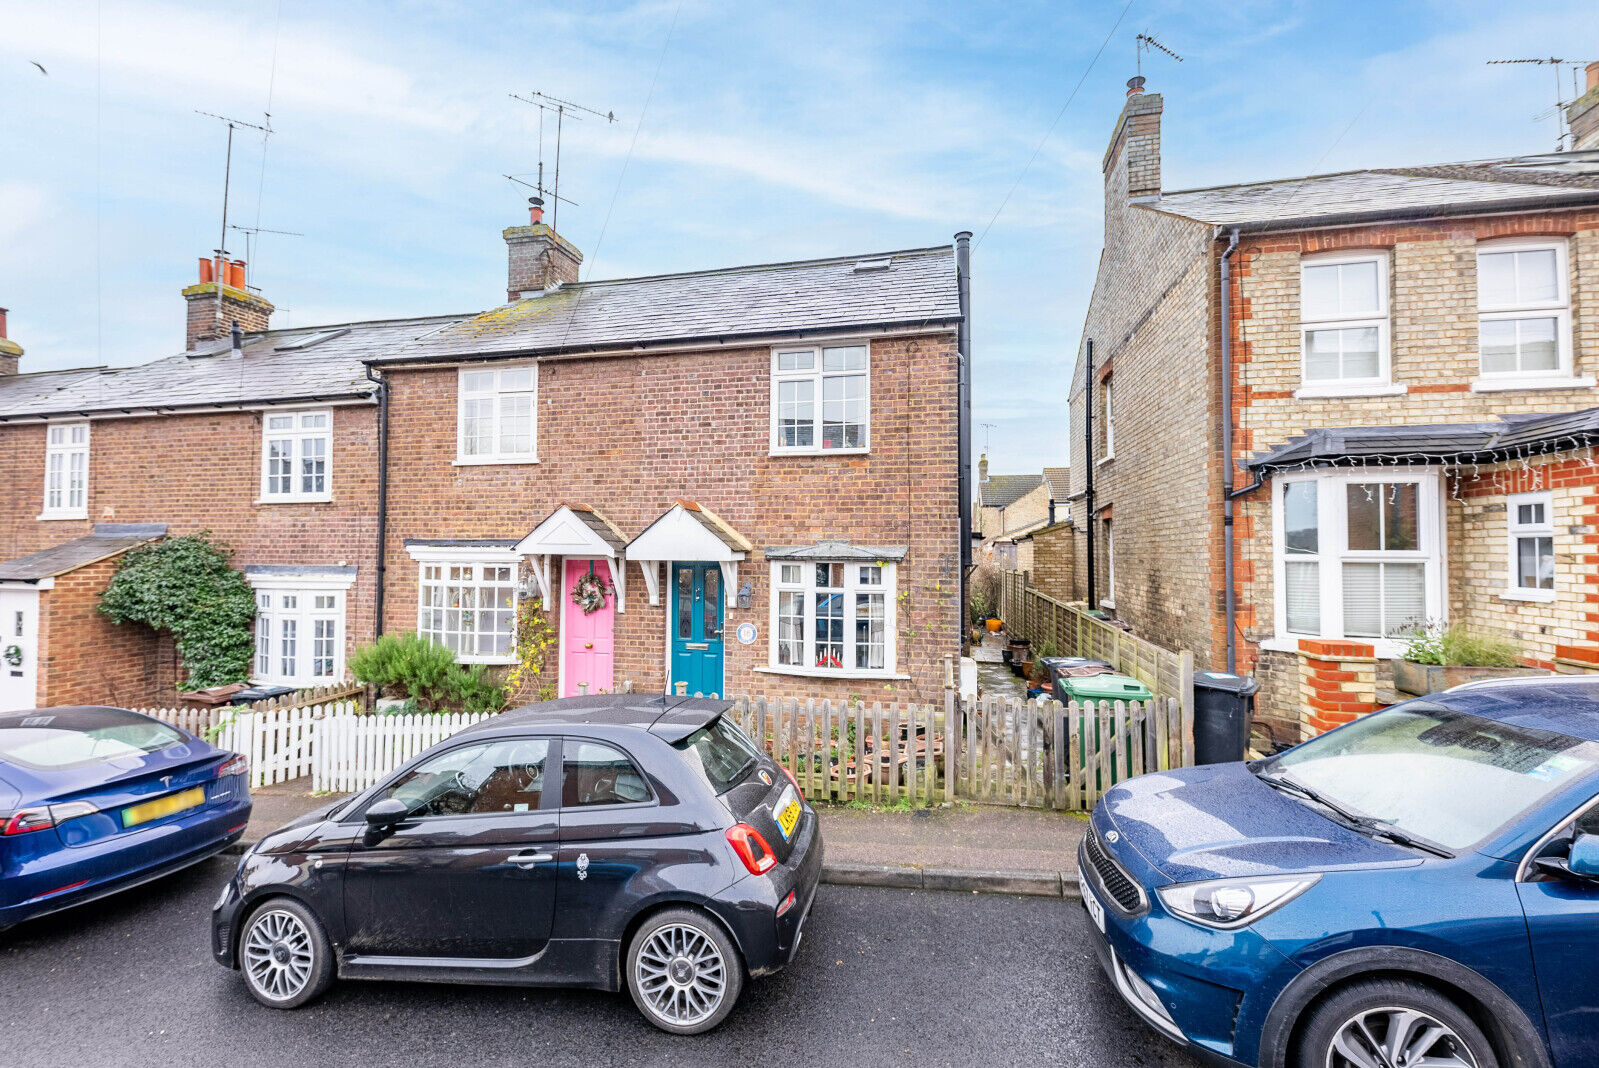 3 bedroom end terraced house for sale Necton Road, Wheathampstead, AL4, main image